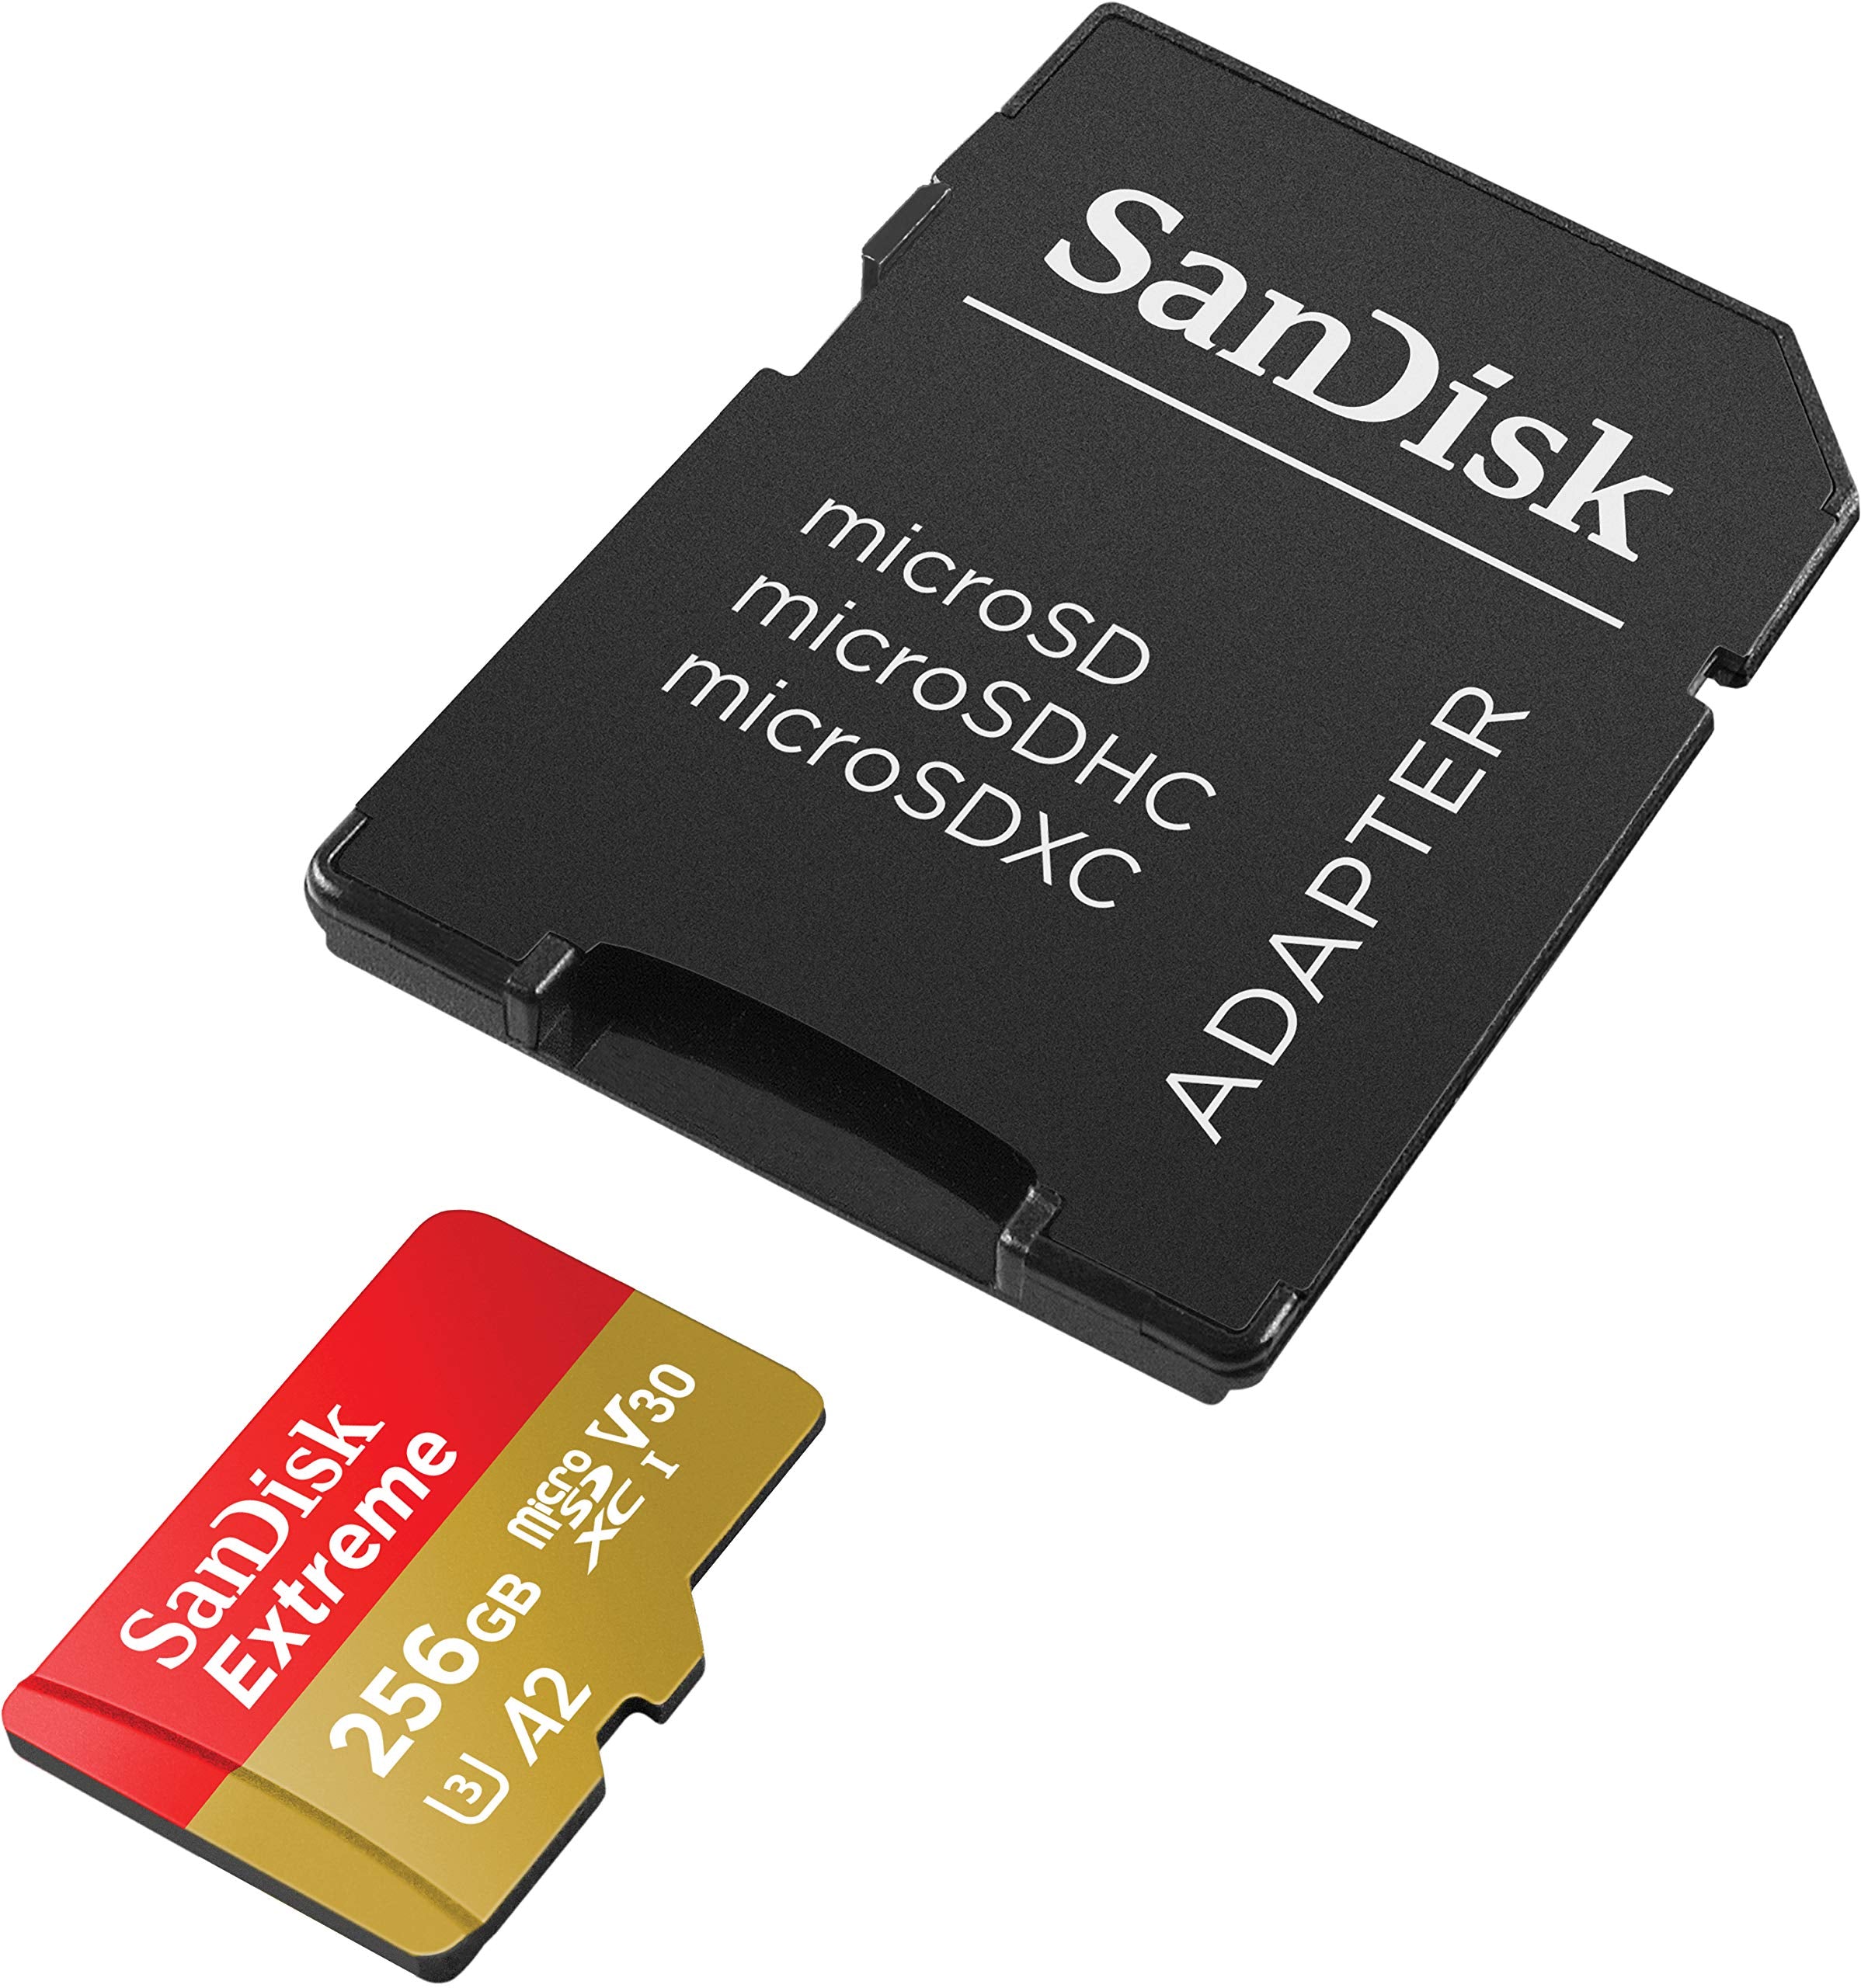 SanDisk 256GB Extreme microSD UHS-I Card with Adapter - U3 A2 - SDSQXA1-256G-GN6MA